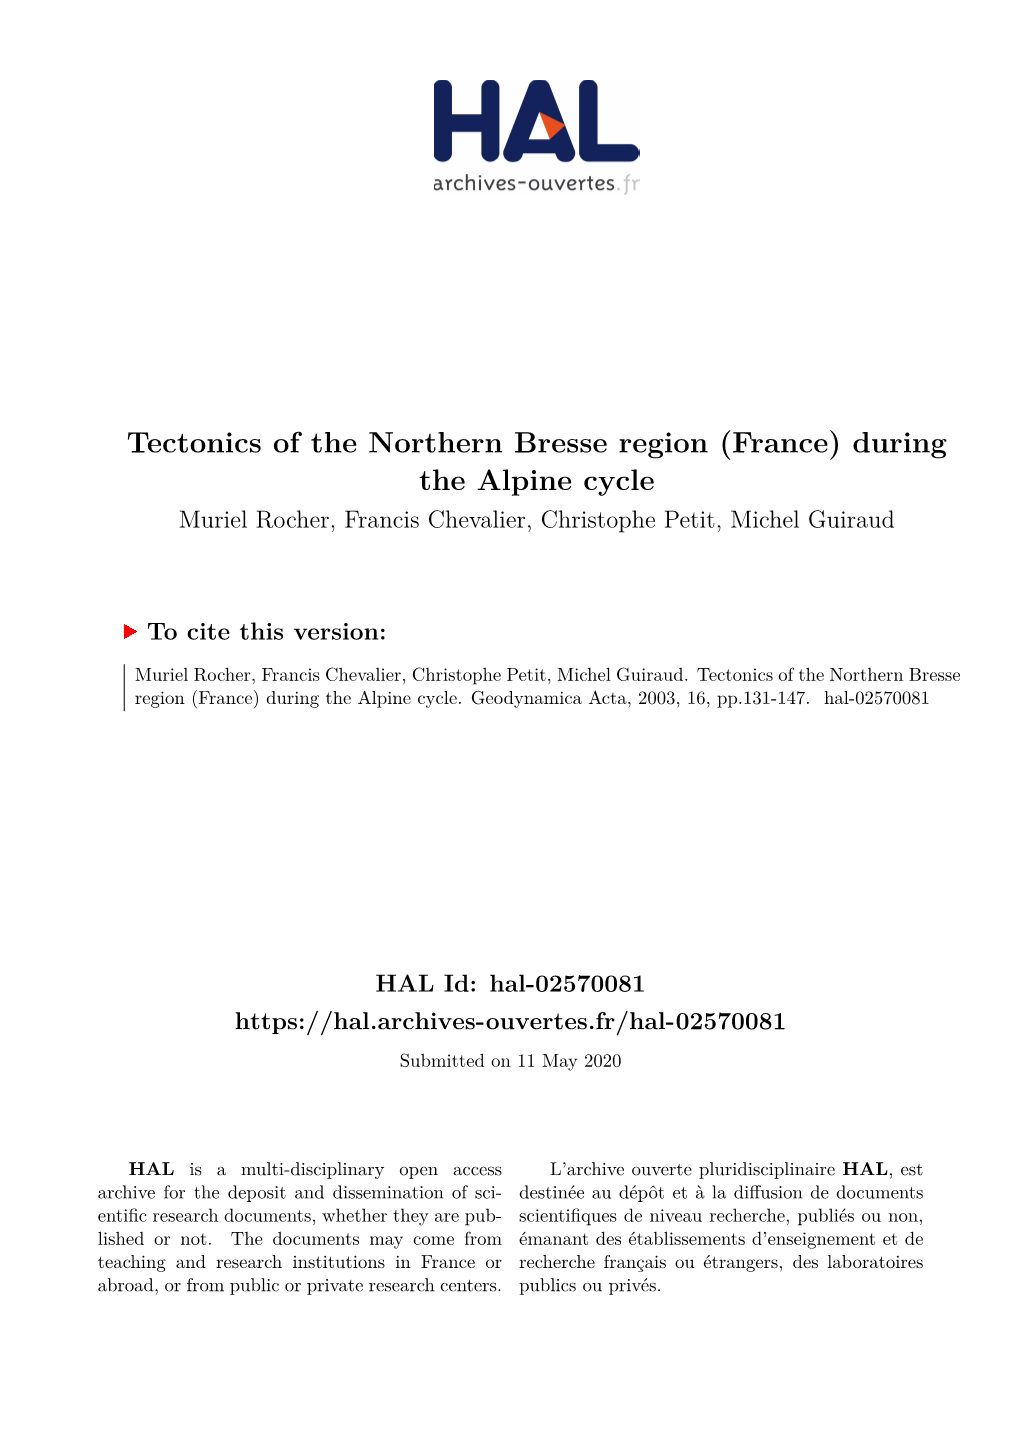 Tectonics of the Northern Bresse Region (France) During the Alpine Cycle Muriel Rocher, Francis Chevalier, Christophe Petit, Michel Guiraud